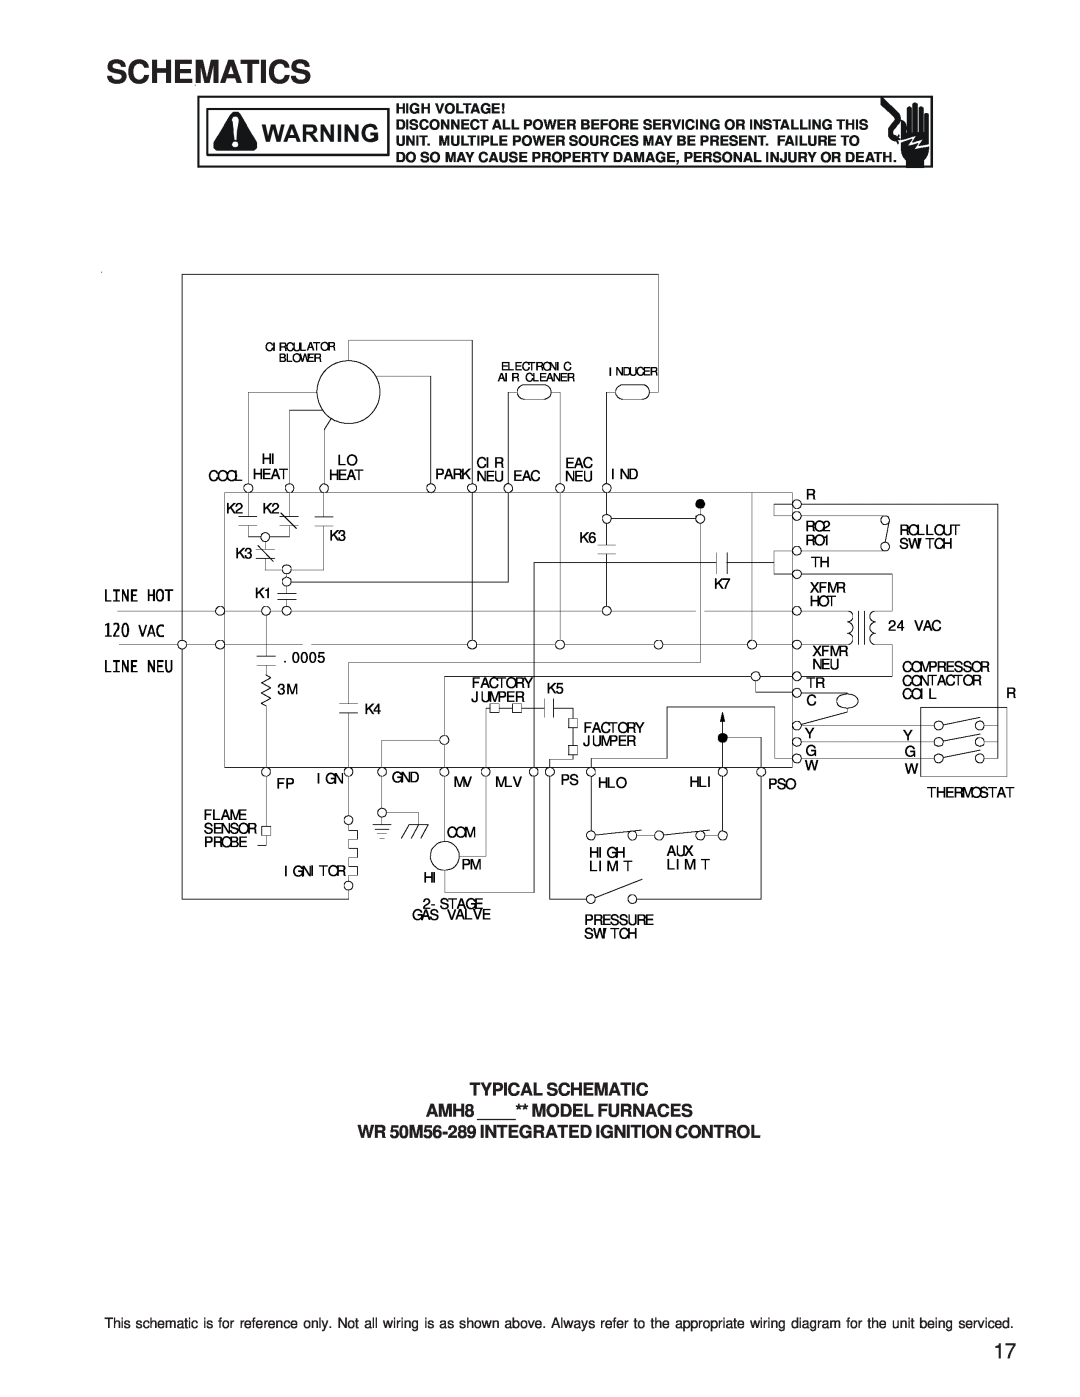 Amana AMH* Schematics, TYPICAL SCHEMATIC AMH8 ** MODEL FURNACES, WR 50M56-289INTEGRATED IGNITION CONTROL, High Voltage 